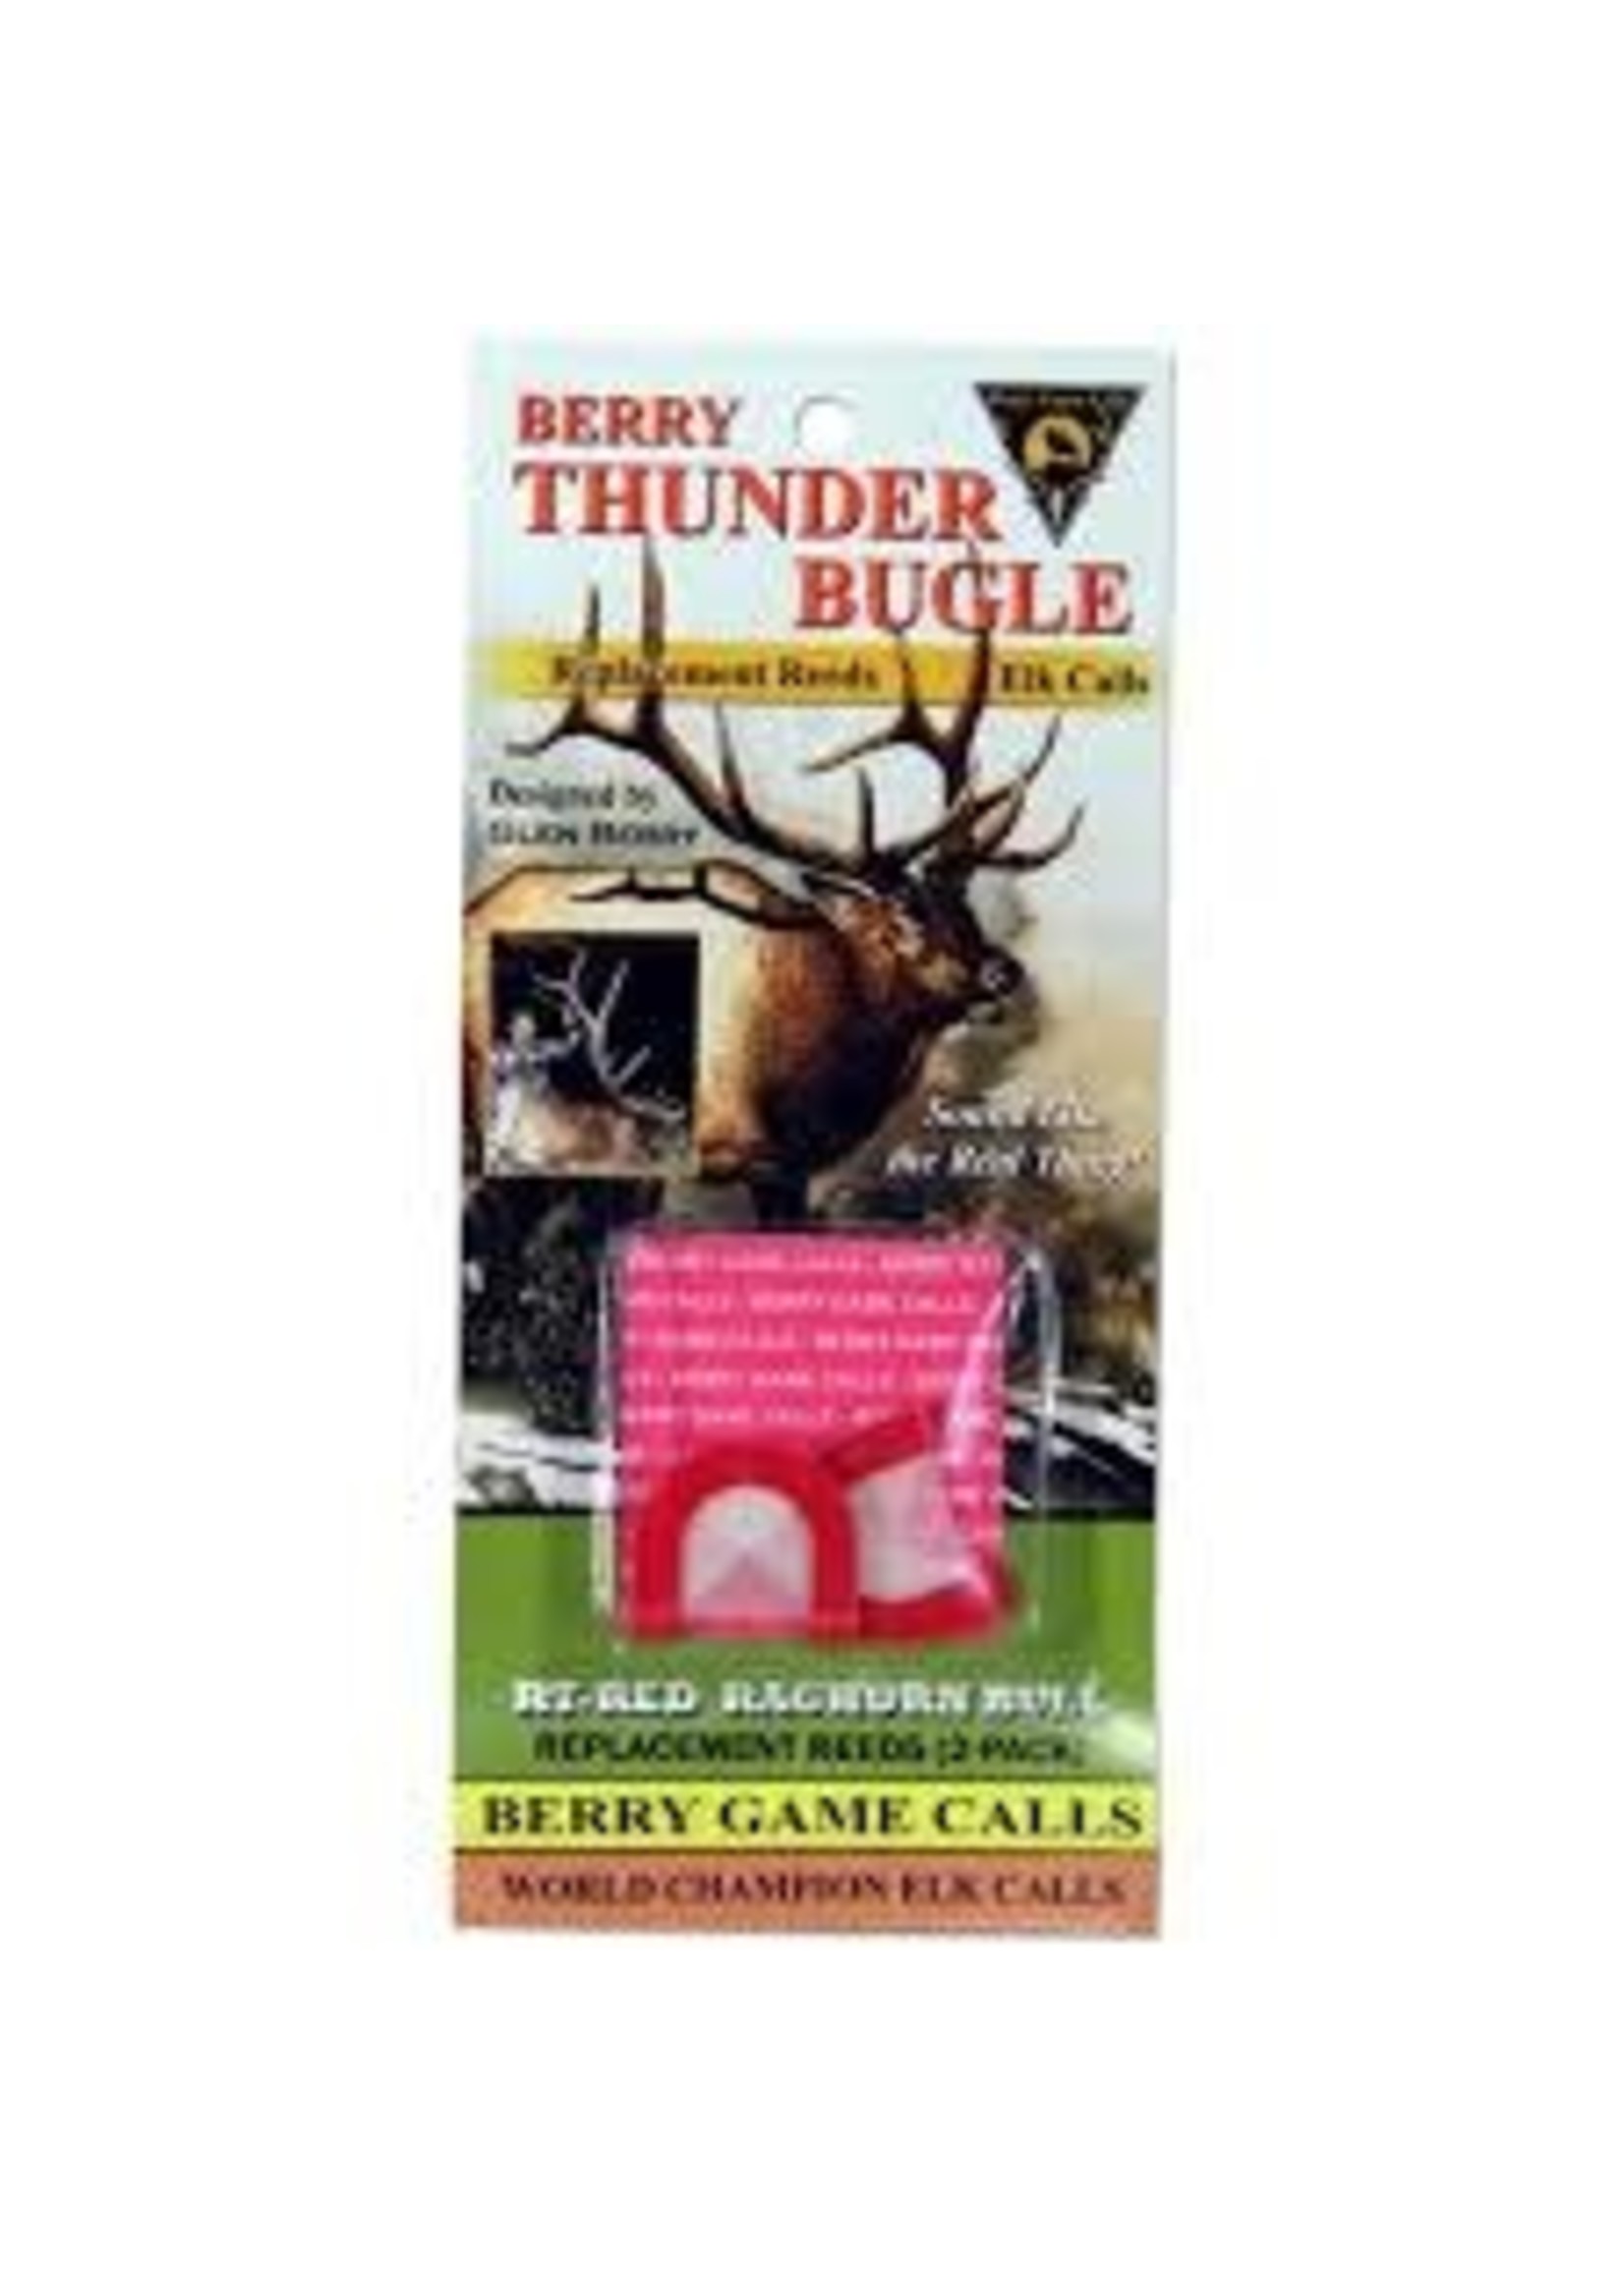 BERRY GAME CALLS BERRY THUNDER BUGLE REED REPLACEMENT RT-RED RAGHORN BULL